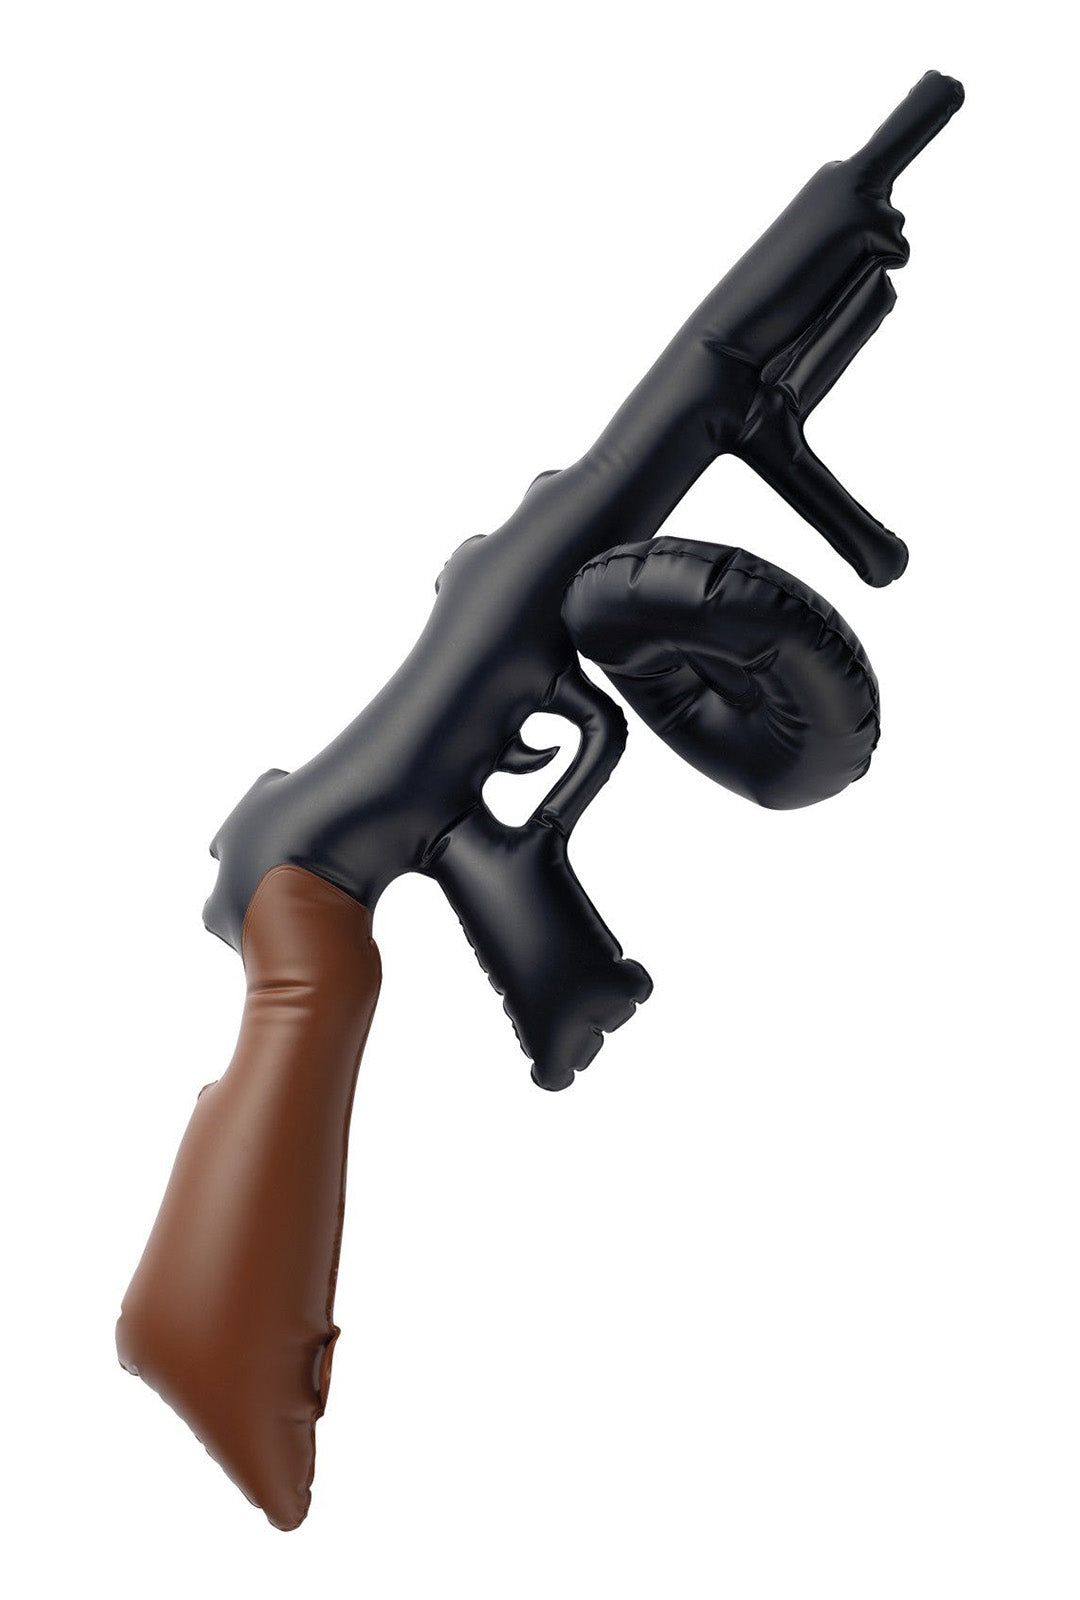 Inflatable Tommy Gun